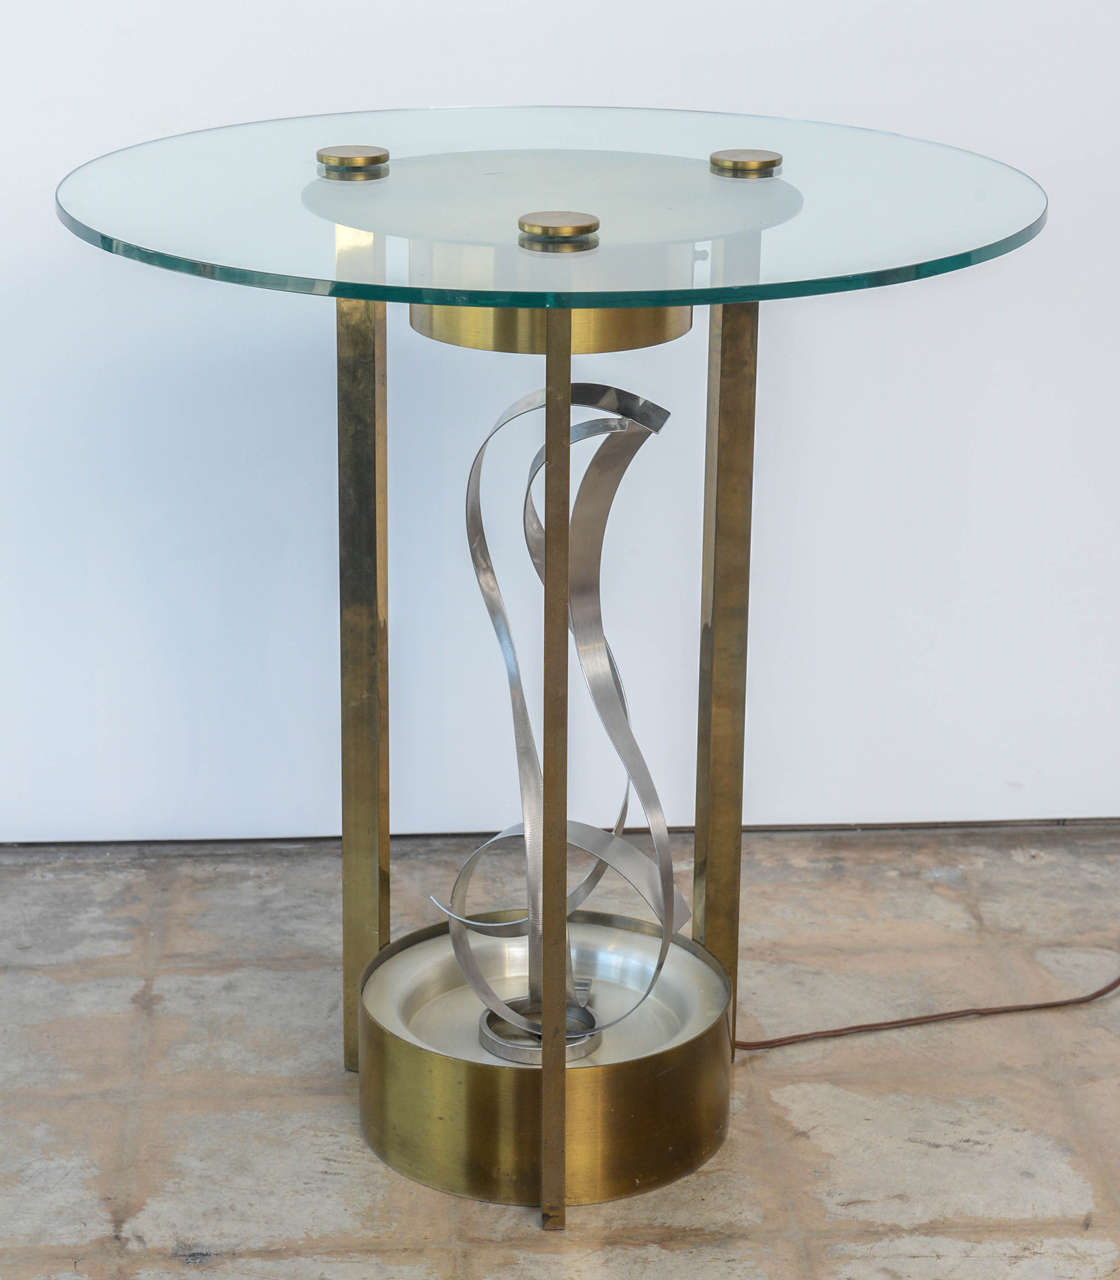 American Modern Chrome, Brass and Glass Side Table, Fontana Arte, 1960's In Excellent Condition For Sale In Hollywood, FL